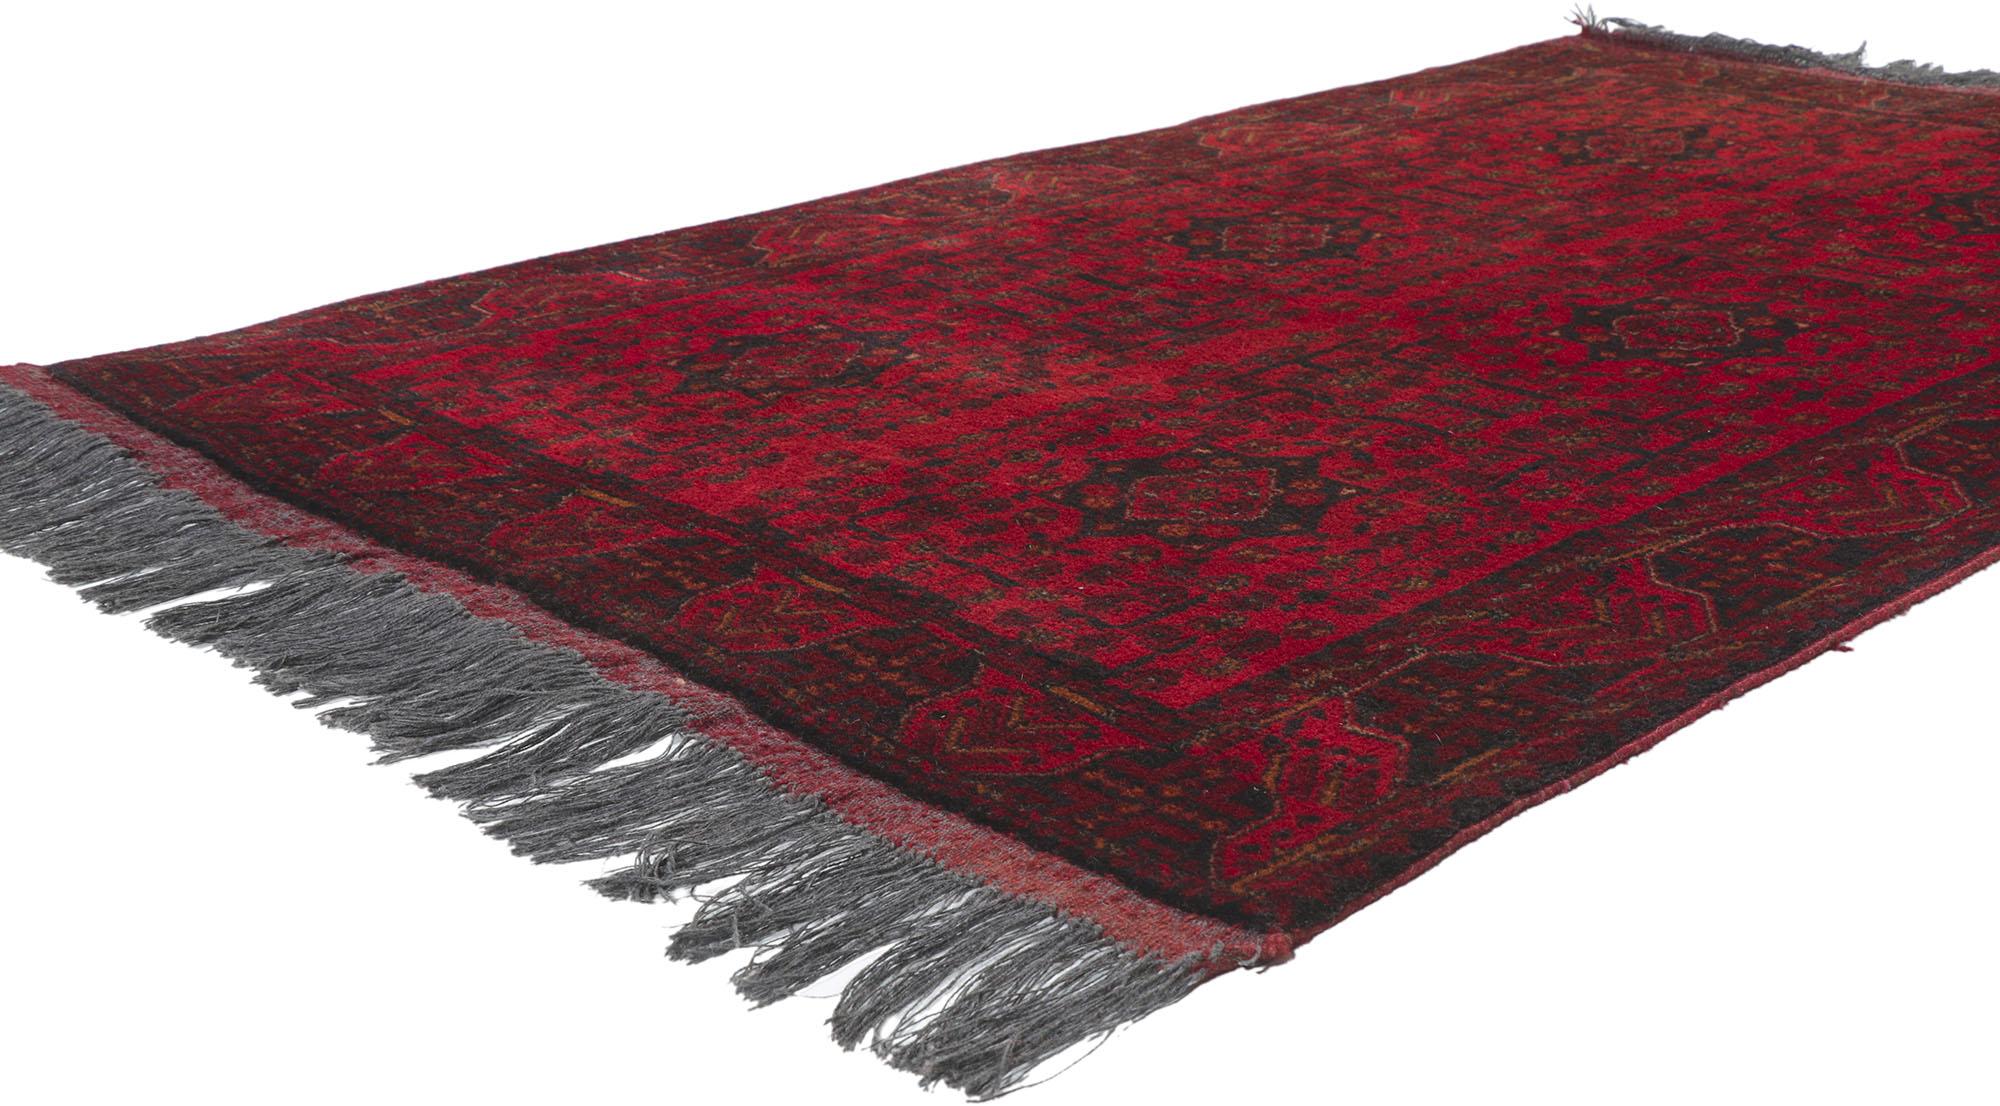 78205 Vintage Persian Turkoman Rug, 04'02 x 06'07.
With its timeless style, incredible detail and texture, this hand knotted wool vintage Turkoman rug is a captivating vision of woven beauty. The botanical design and saturated colors woven into this